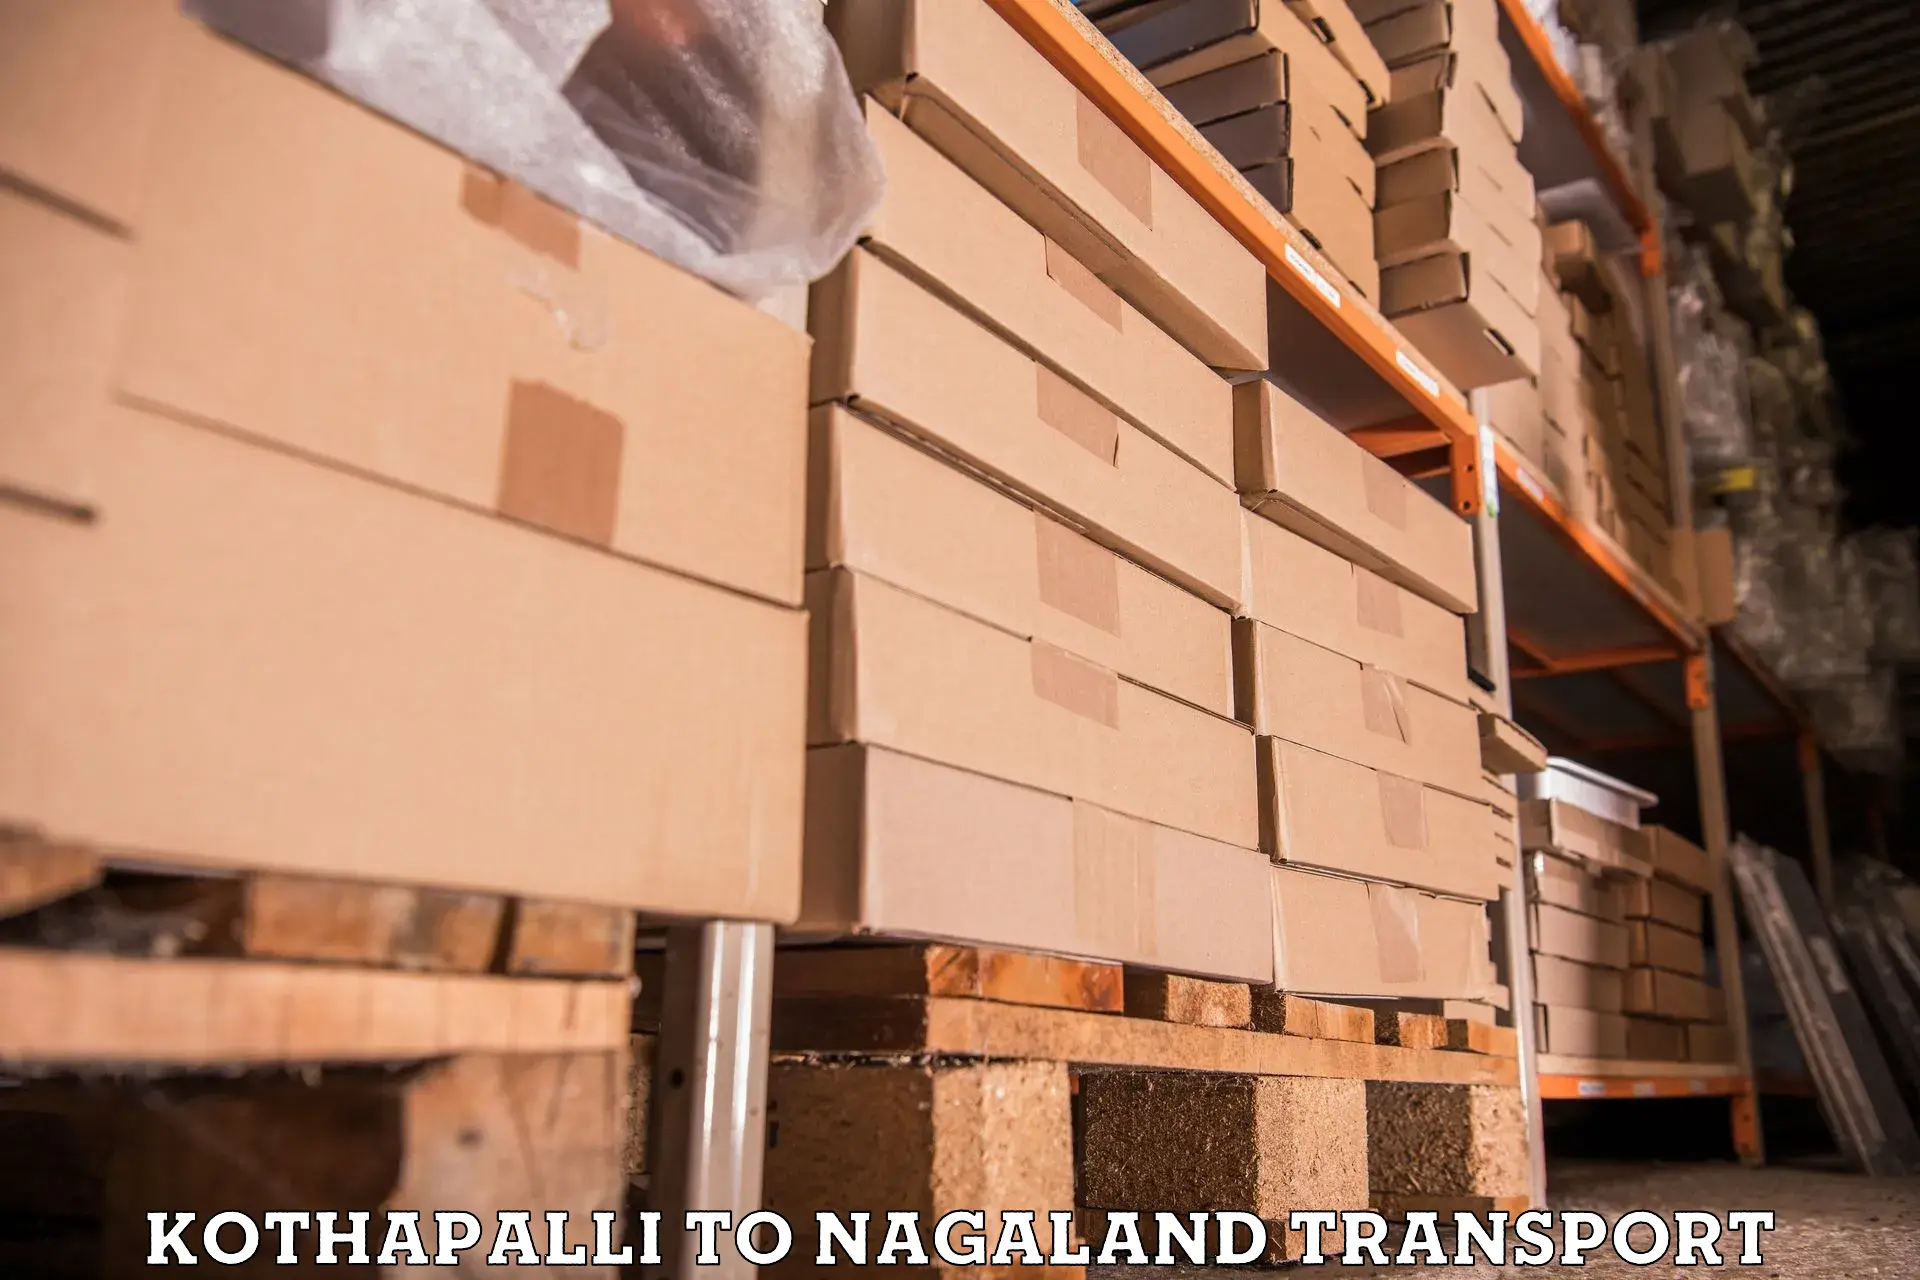 Goods delivery service Kothapalli to Nagaland